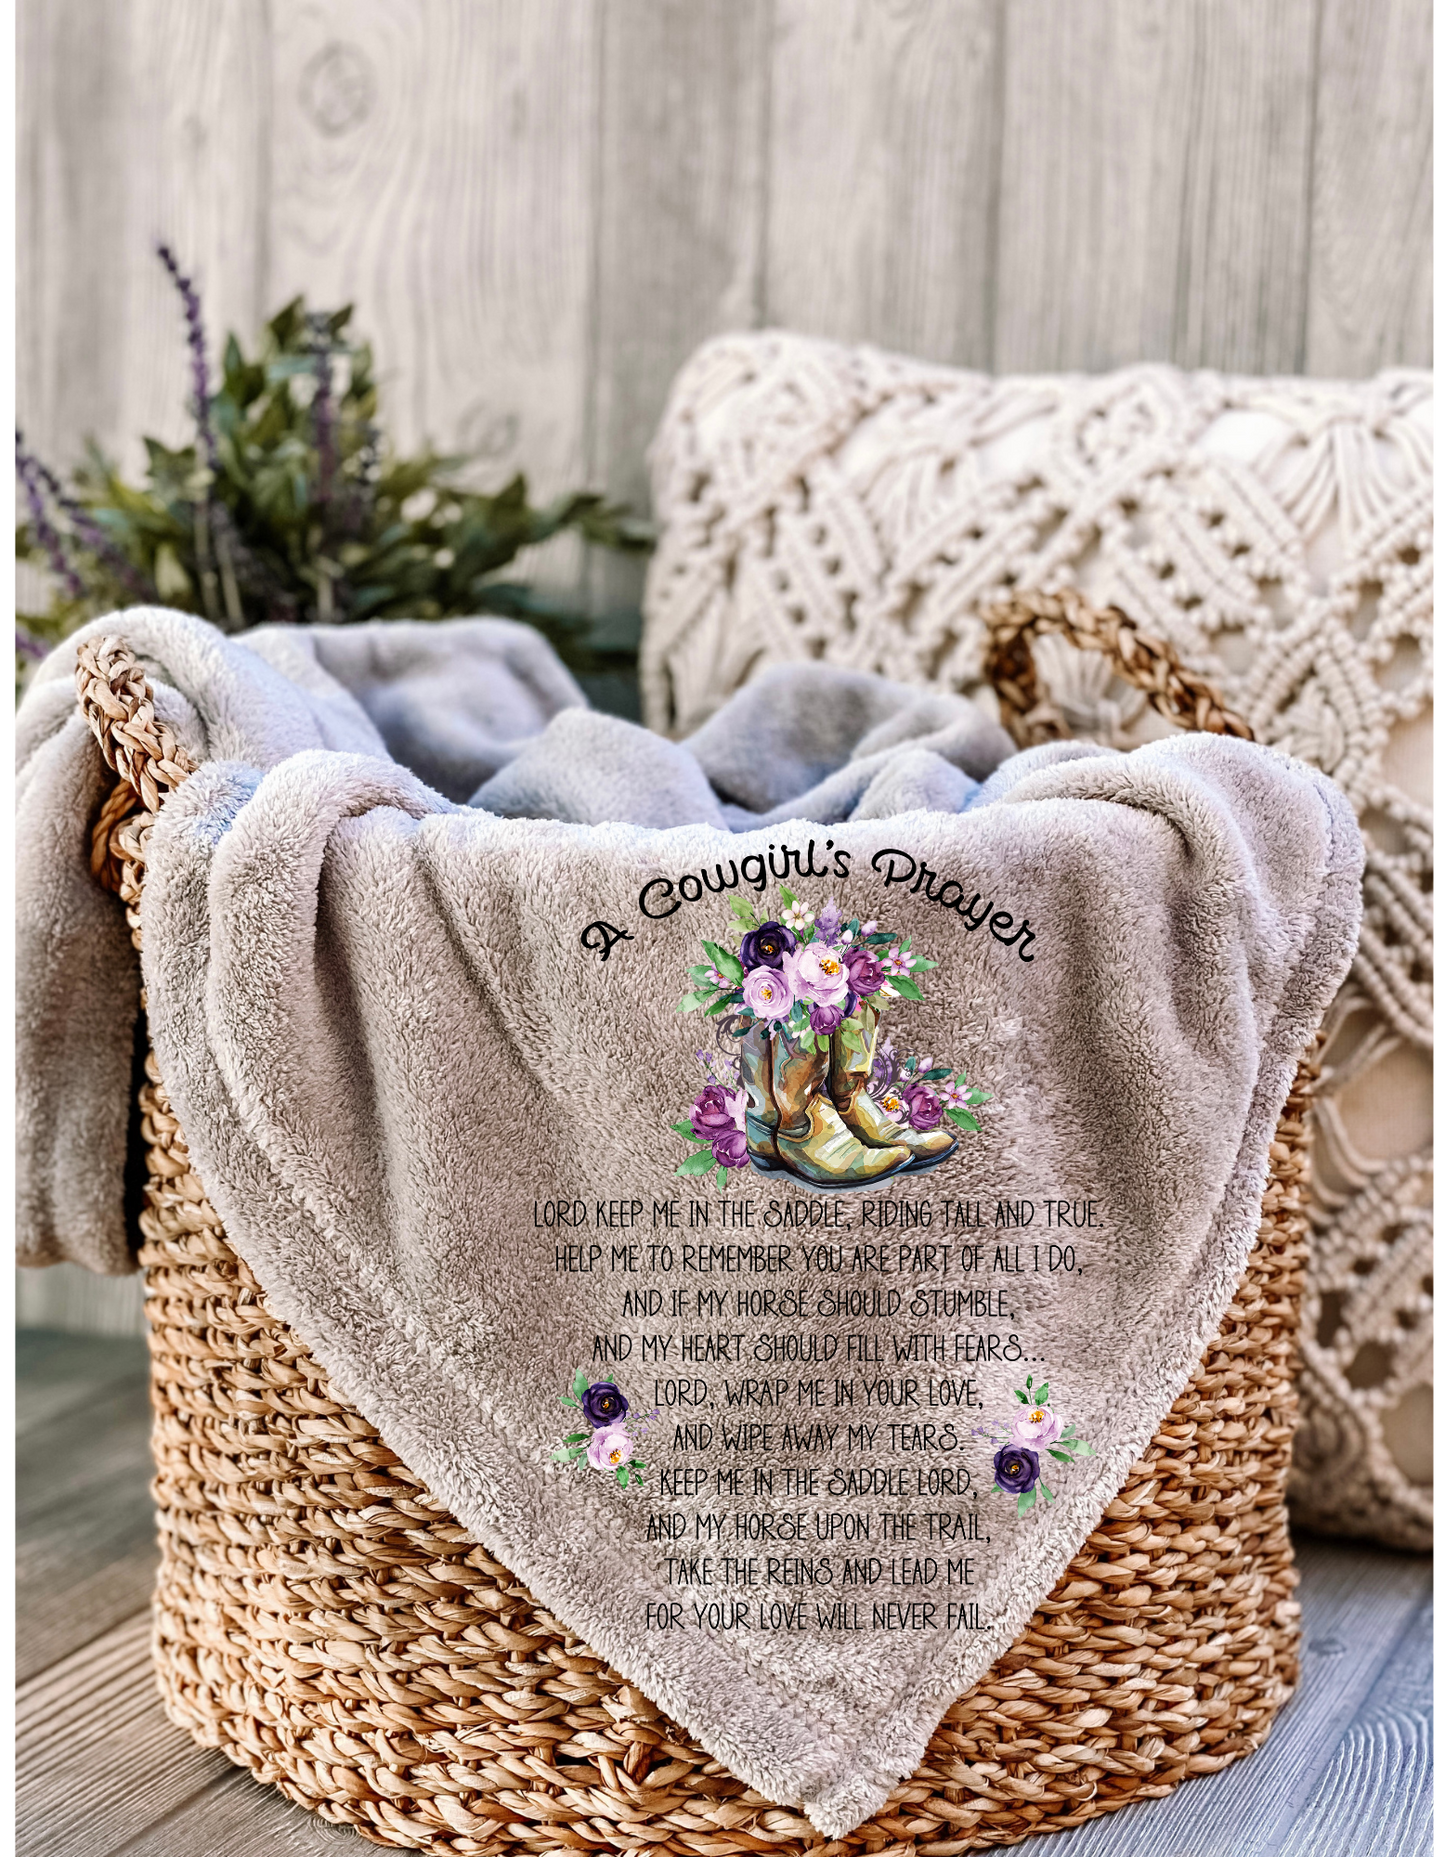 A Cowgirl's Prayer Blanket